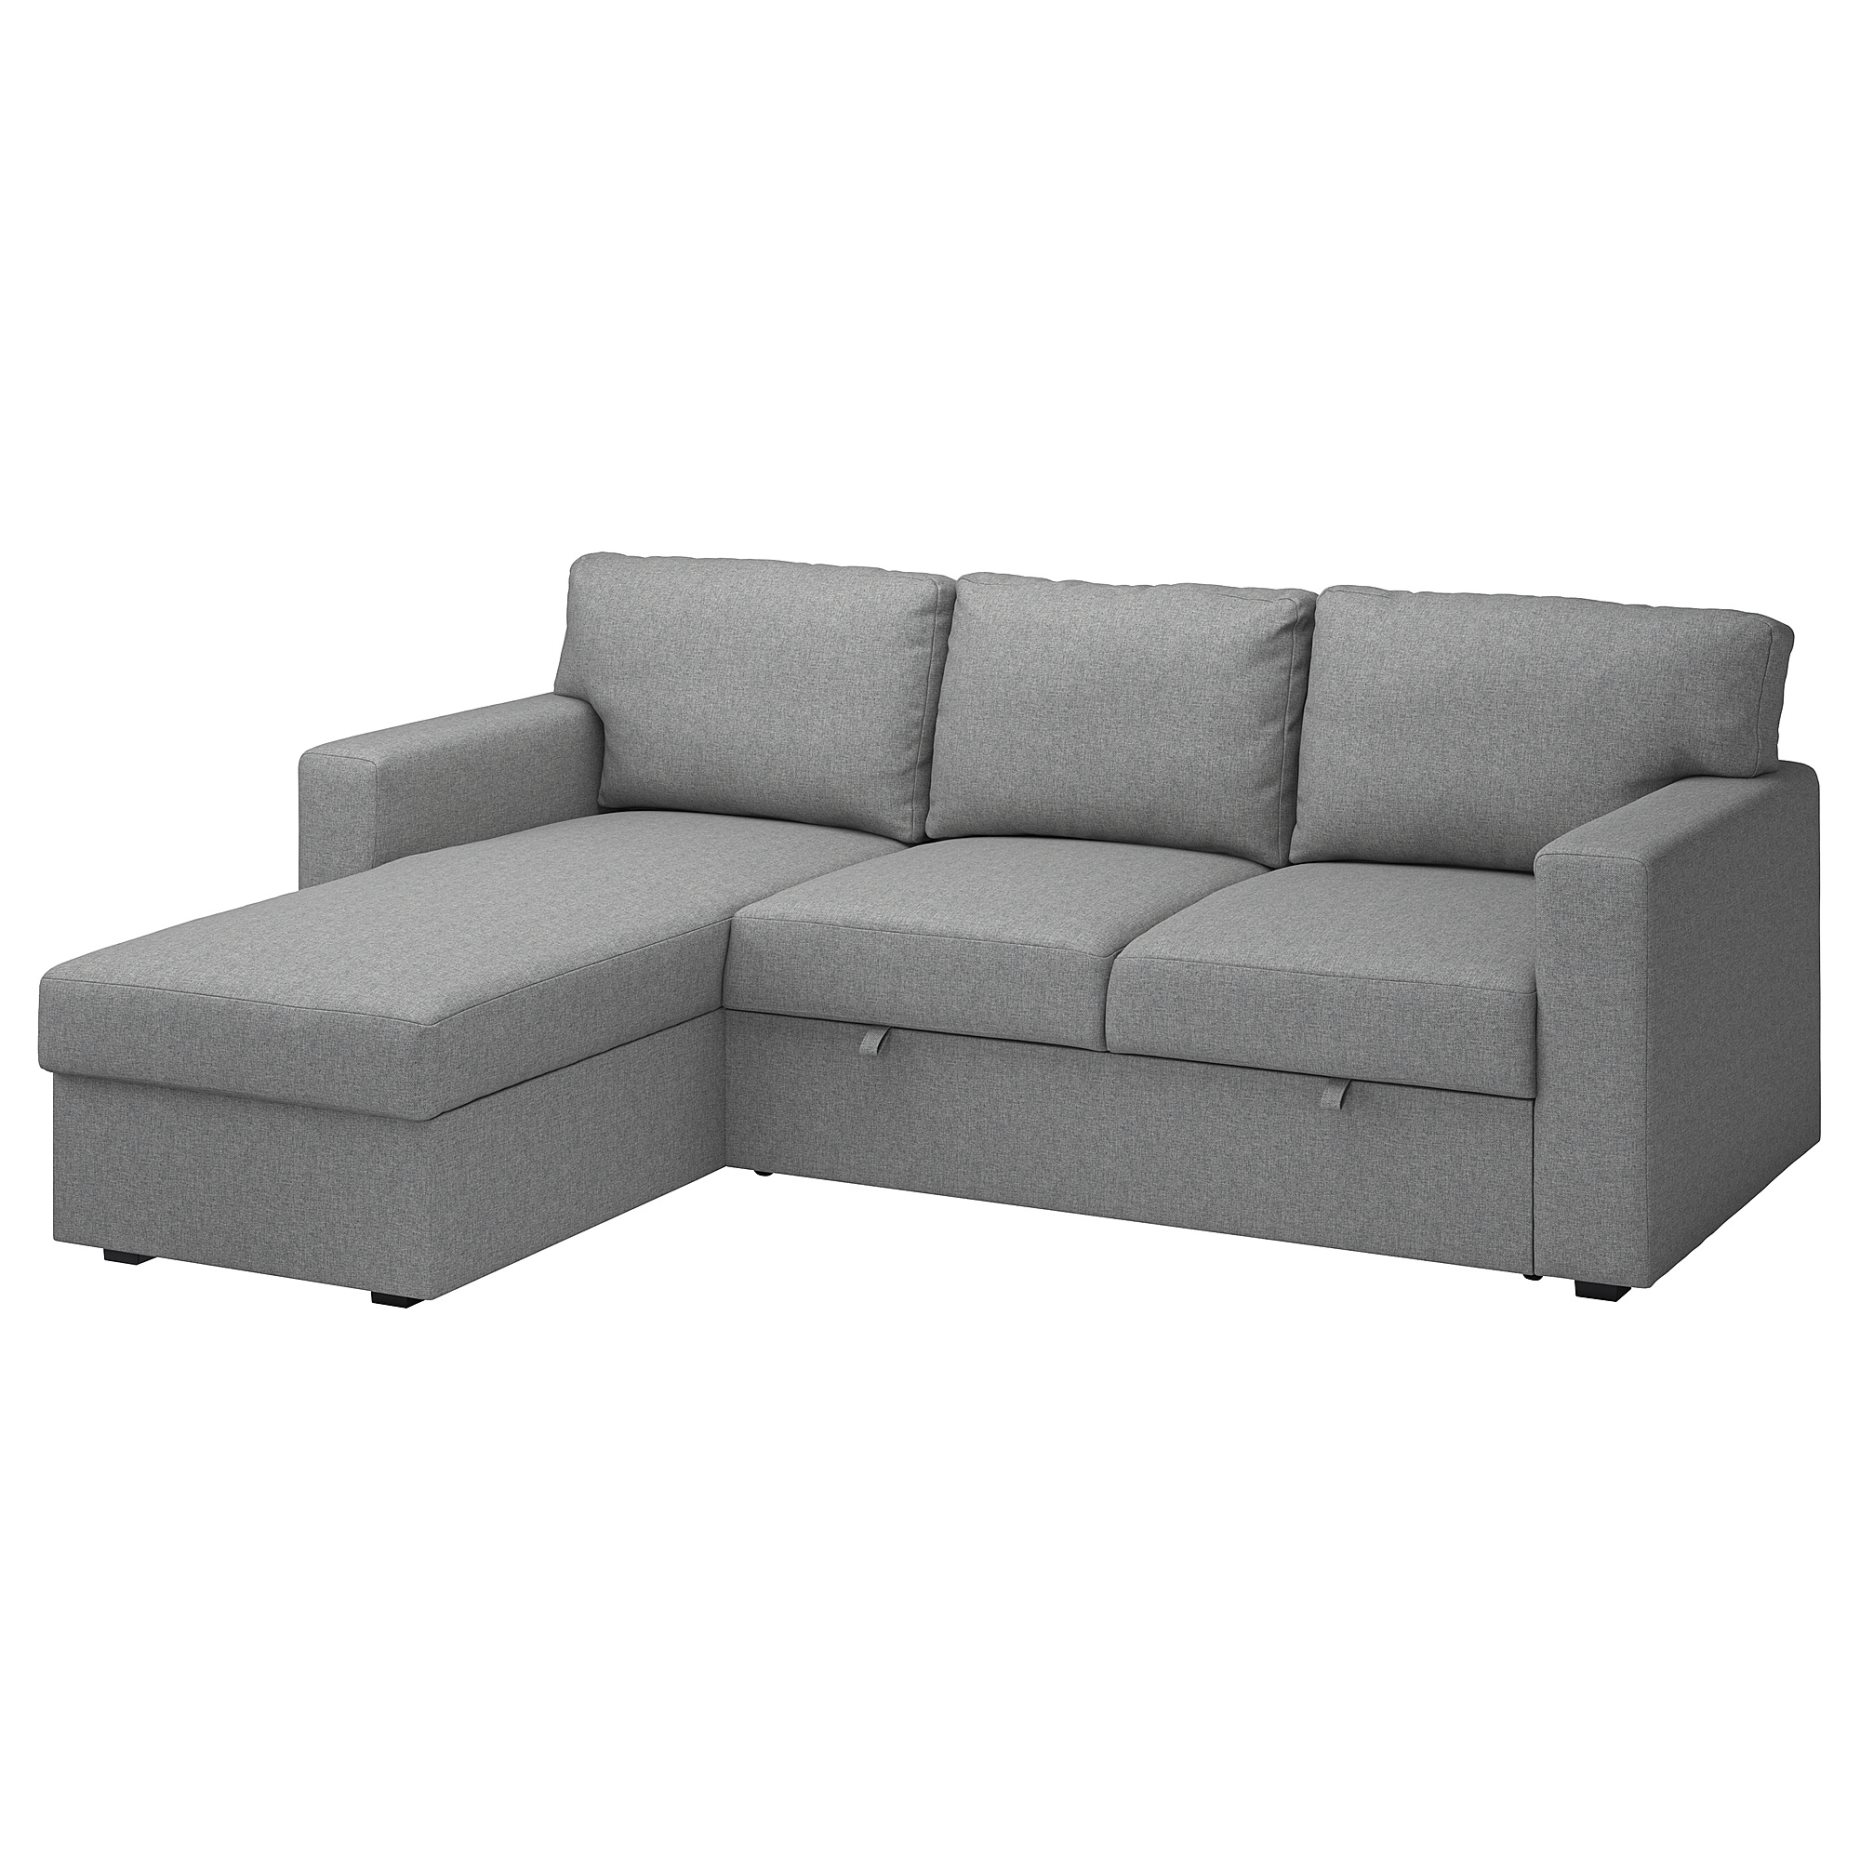 BARSLOV, 3-seat sofa-bed with chaise longue, 805.415.94